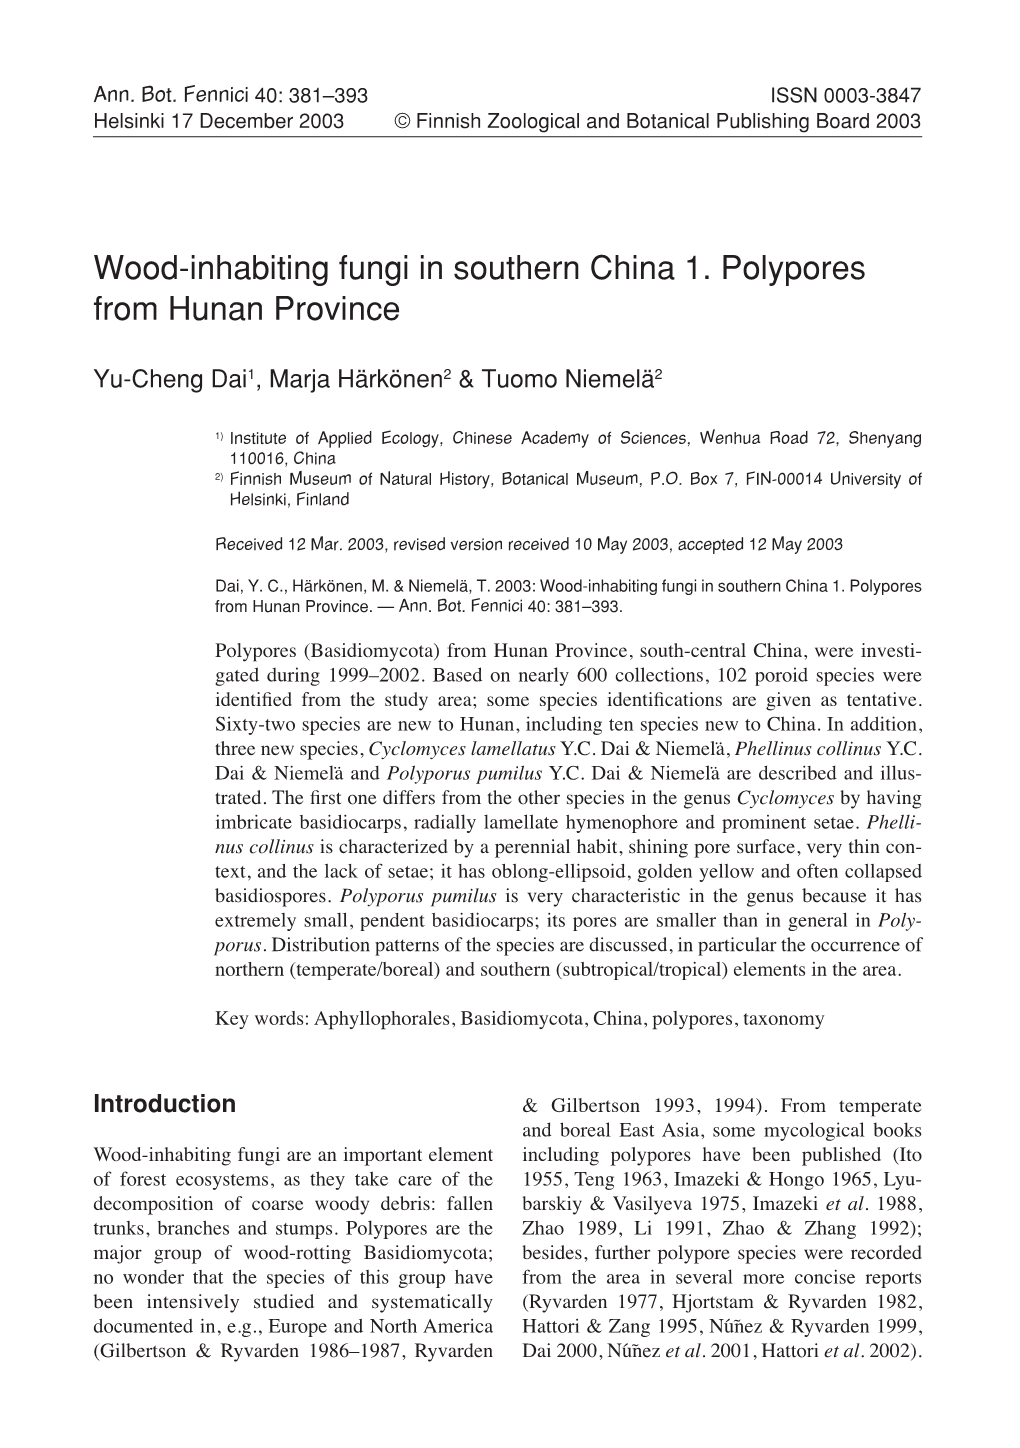 Wood-Inhabiting Fungi in Southern China 1. Polypores from Hunan Province